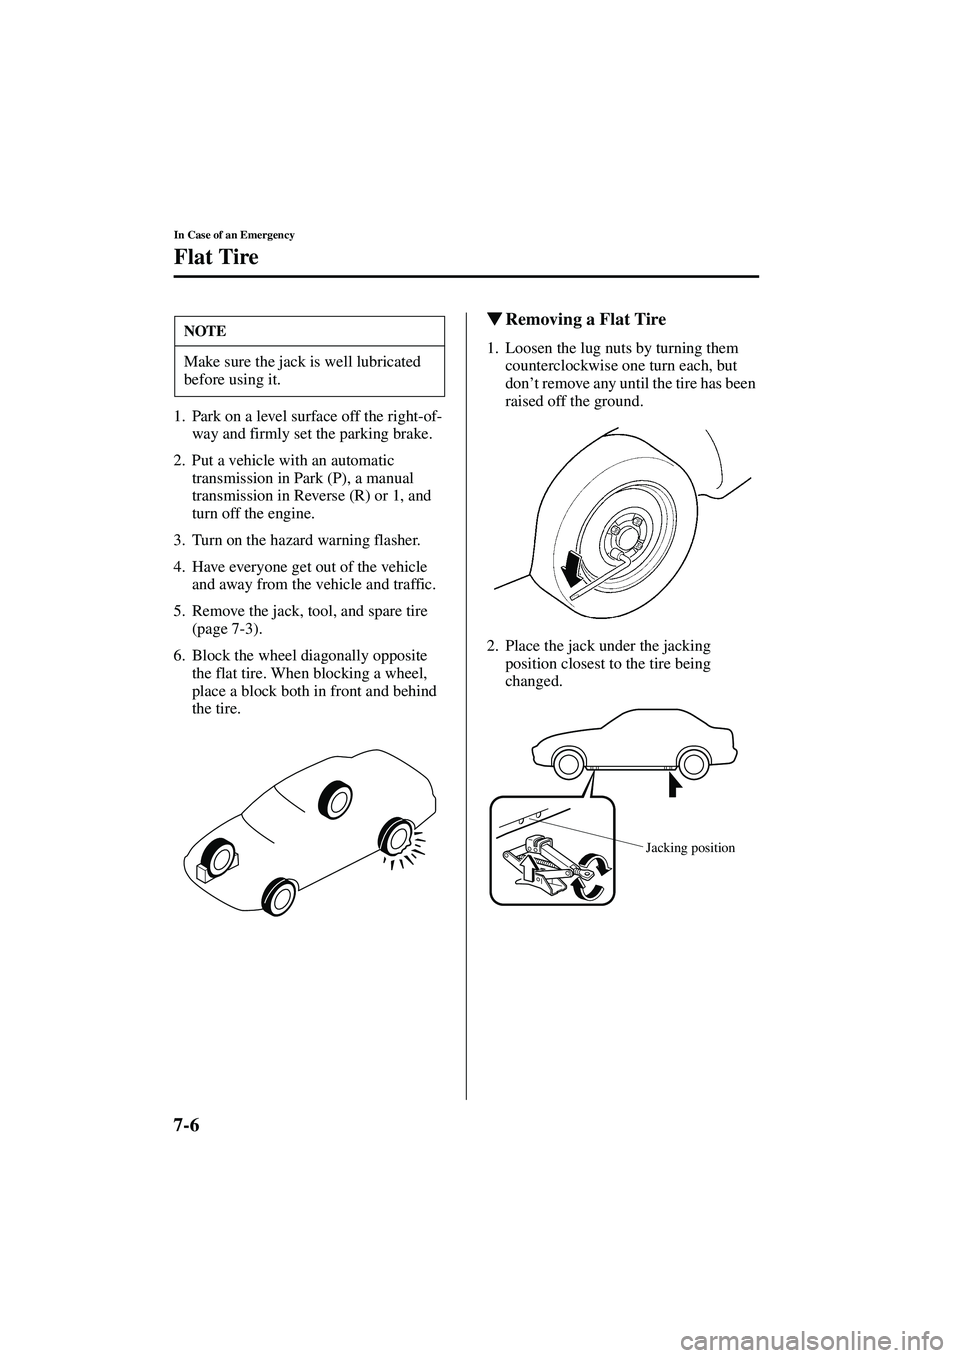 MAZDA MODEL MX-5 MIATA 2003  Owners Manual 7-6
In Case of an Emergency
Flat Tire
Form No. 8R09-EA-02G
1. Park on a level surface off the right-of-way and firmly set the parking brake.
2. Put a vehicle with an automatic  transmission in Park (P